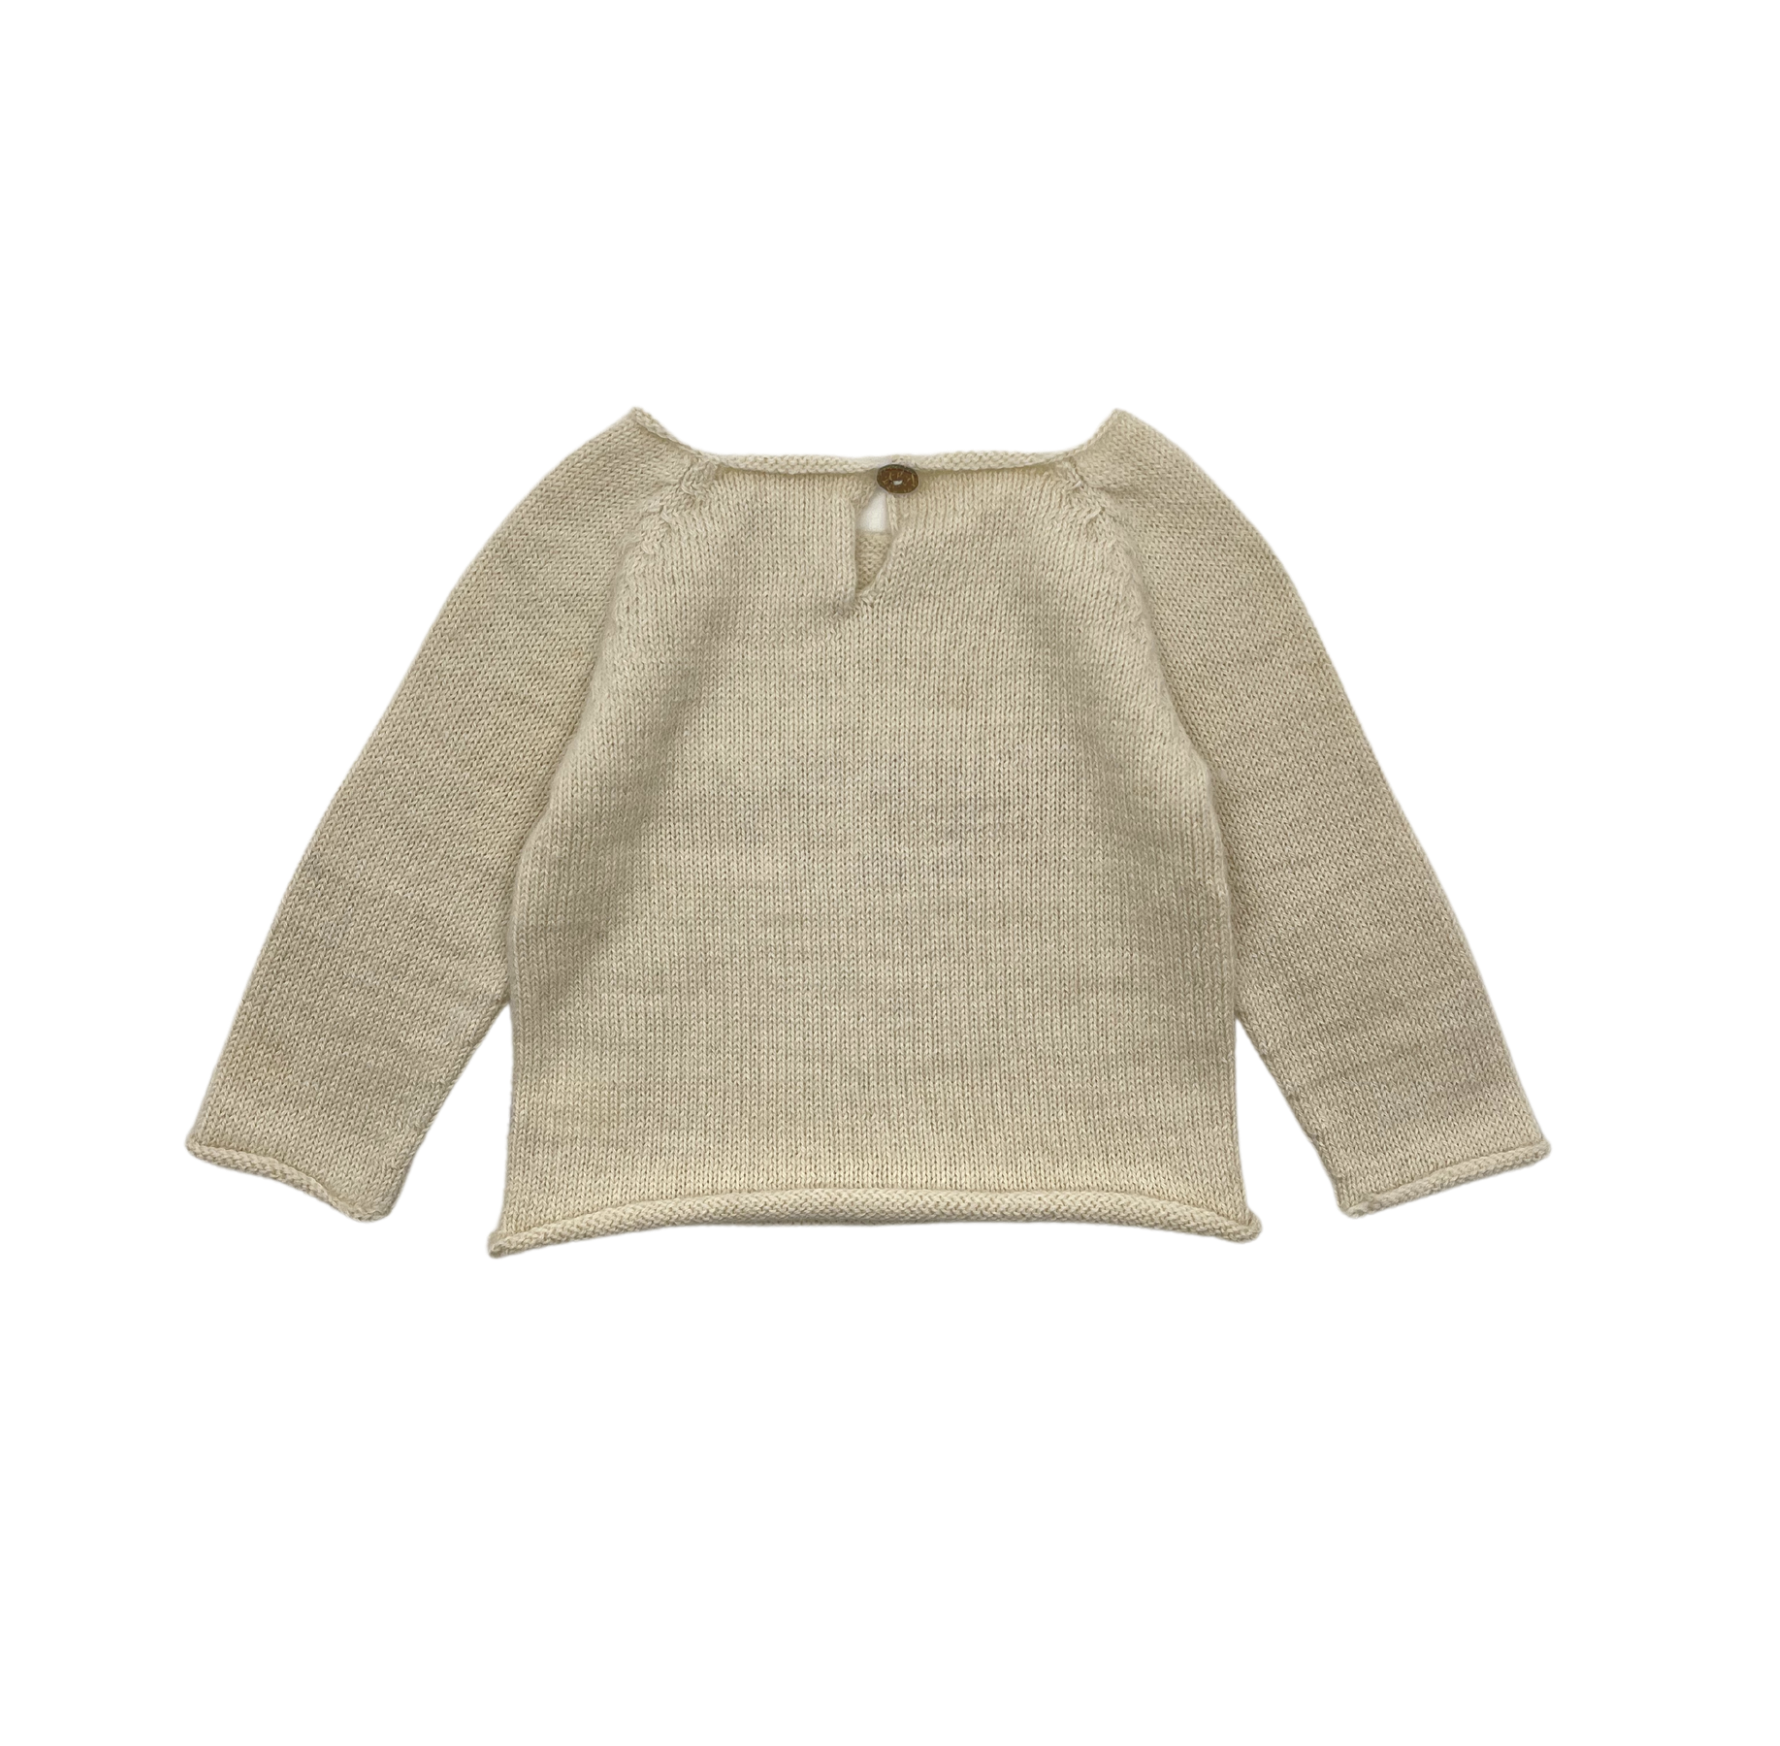 OEUF NYC - "Girl" sweater - 12 months